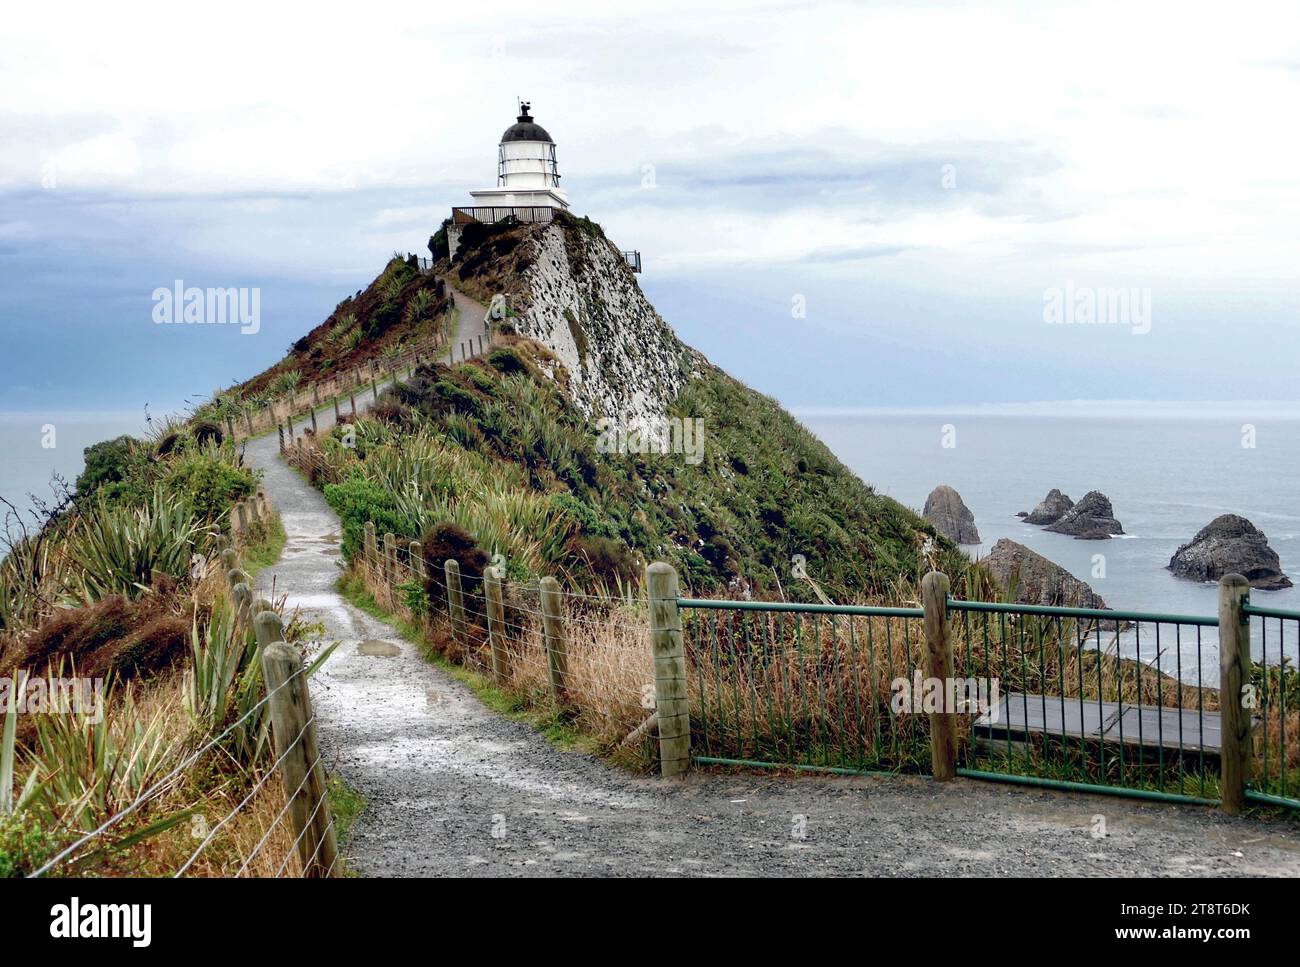 Nugget Point Lighthouse, The 10-metre Nugget Point lighthouse stands 76 metres above sea level on a point close to the nugget rocks. First lit in 1870, the lighthouse was automated in 1988 Stock Photo